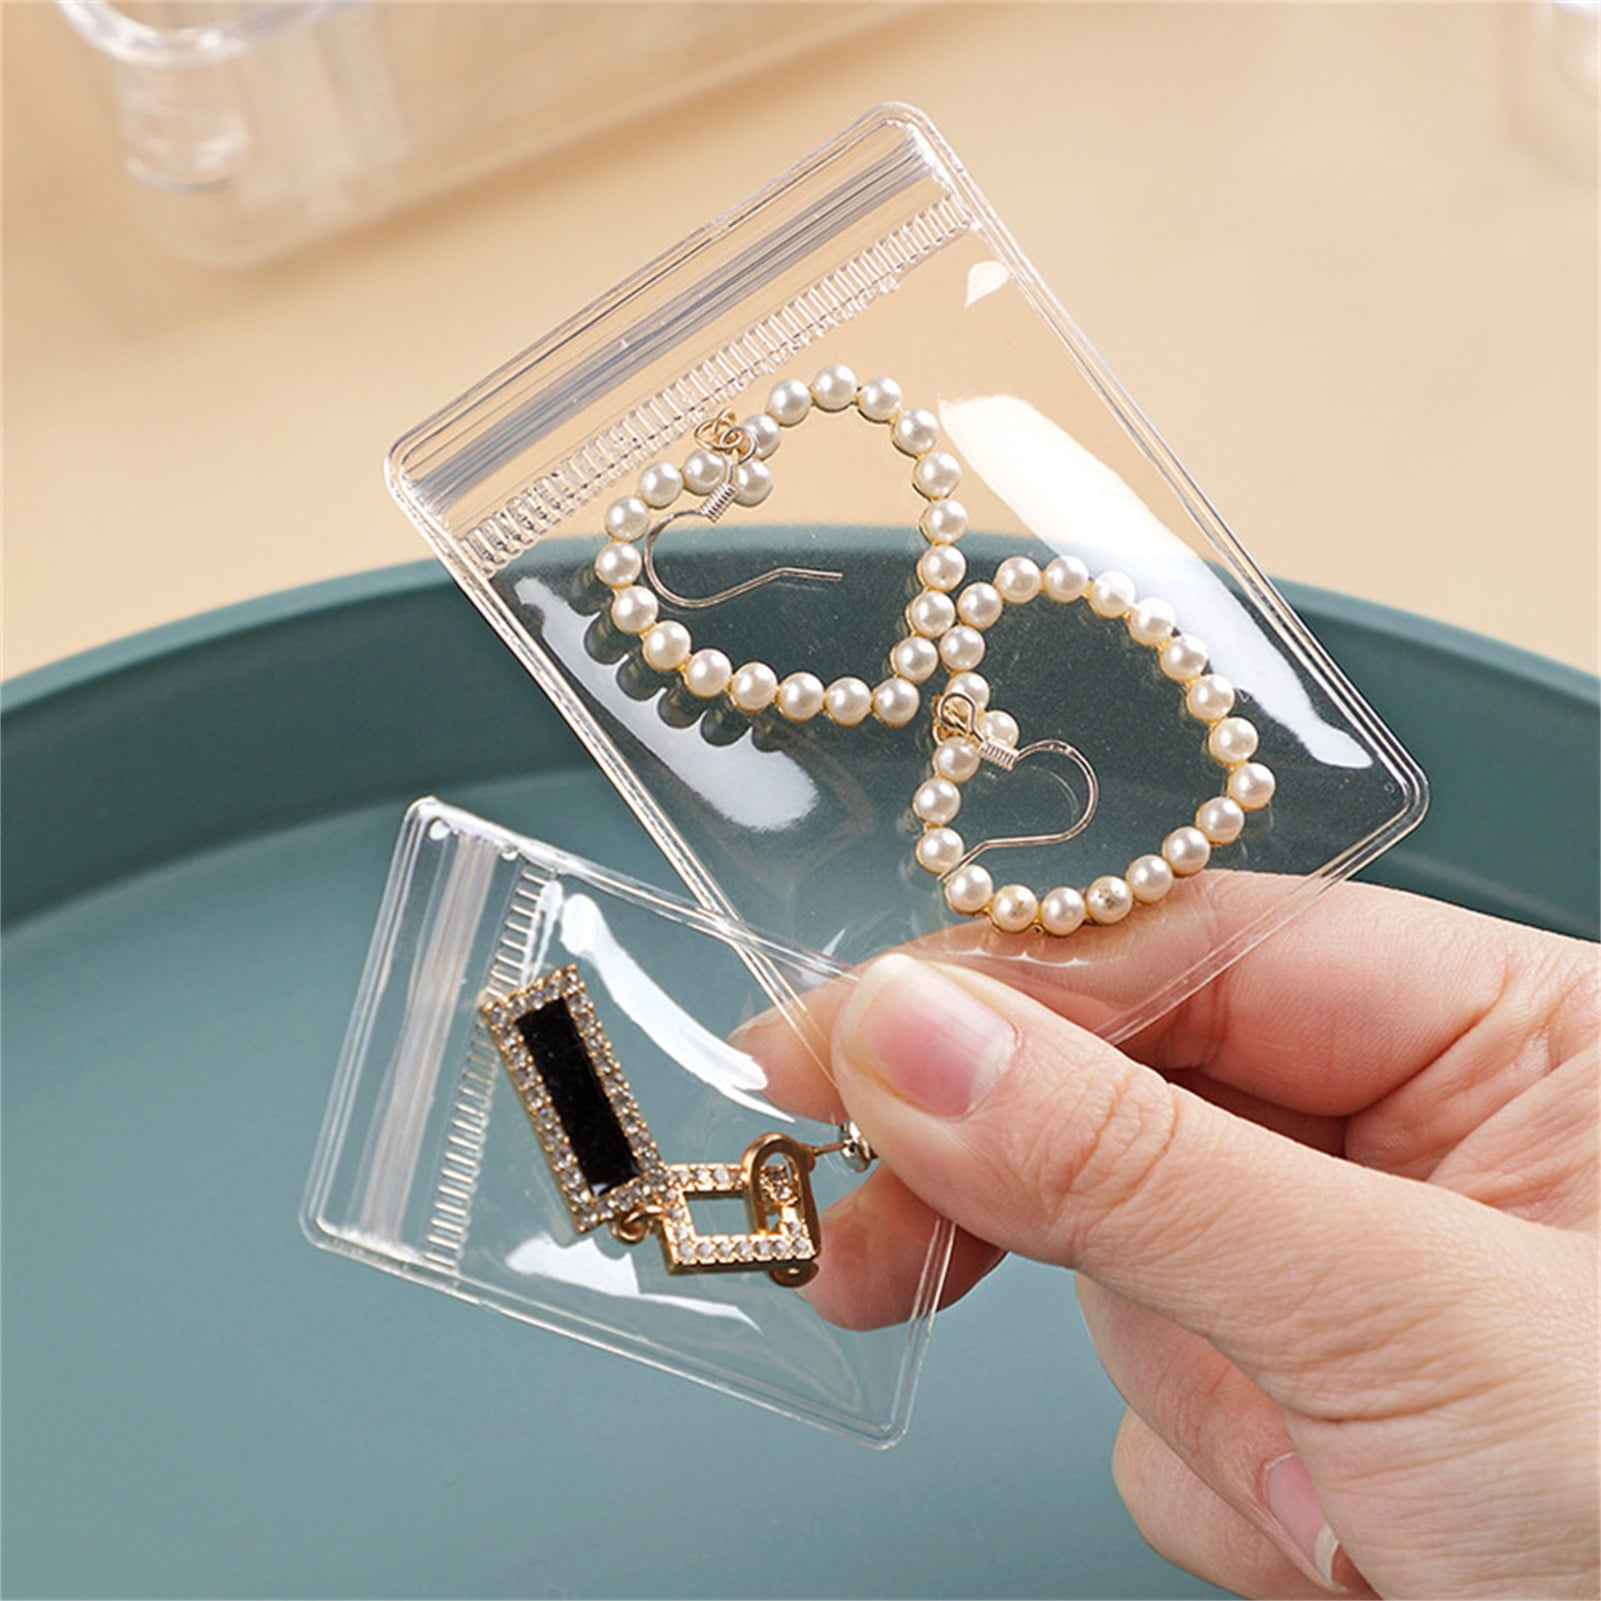 120 Pieces Jewelry Bags Clear Plastic Jewellery Bags Self Seal Bag,  Reclosable Jewelry Zipper Bags Transparent Self Locking Storage Pouch Bag  For Jewe